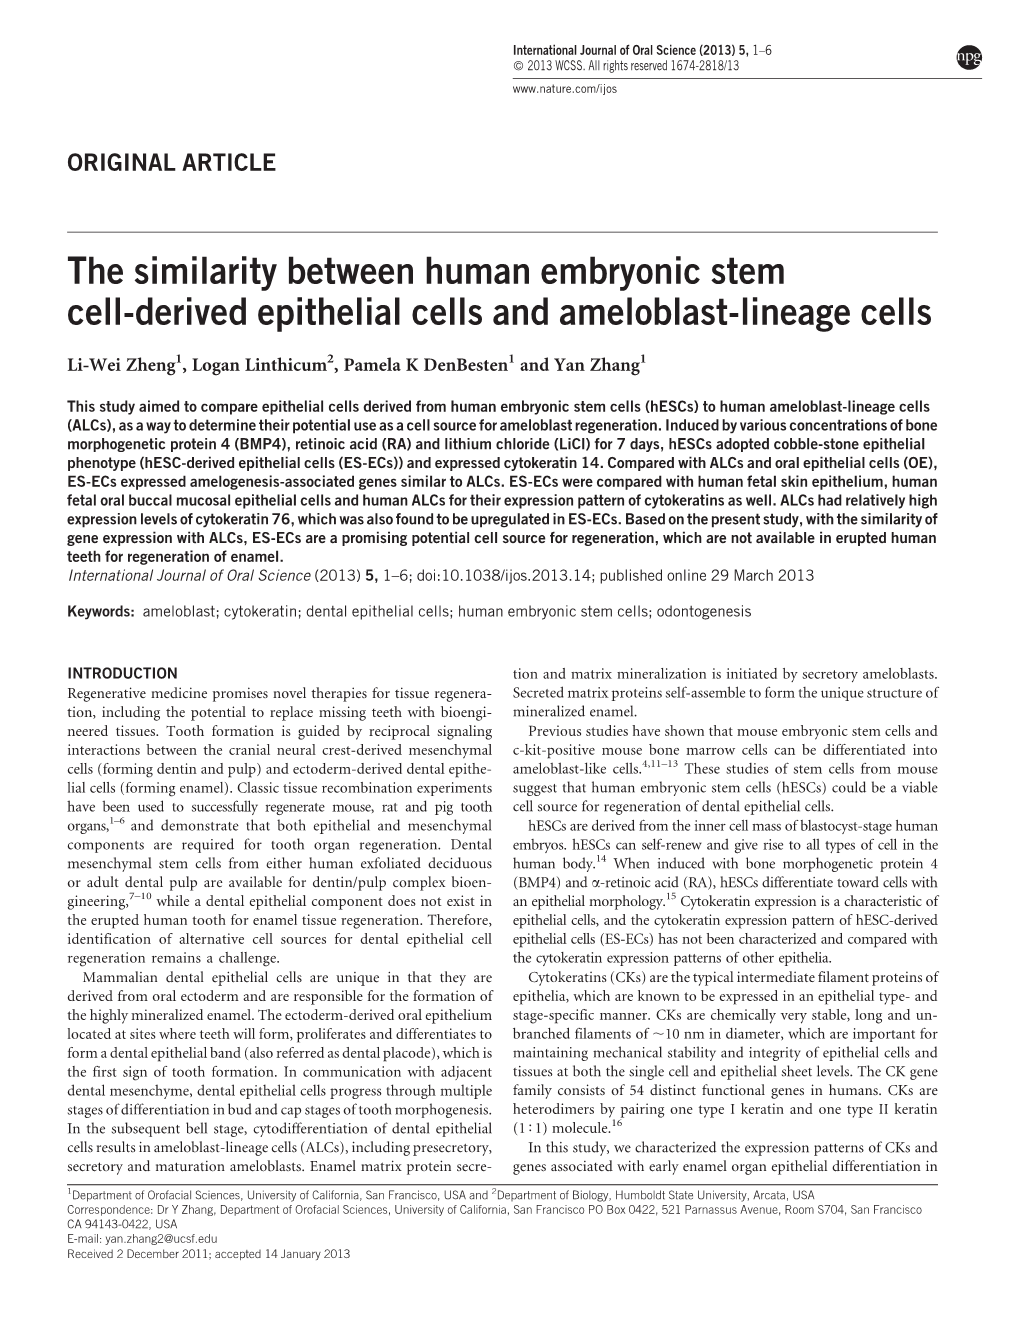 The Similarity Between Human Embryonic Stem Cell-Derived Epithelial Cells and Ameloblast-Lineage Cells